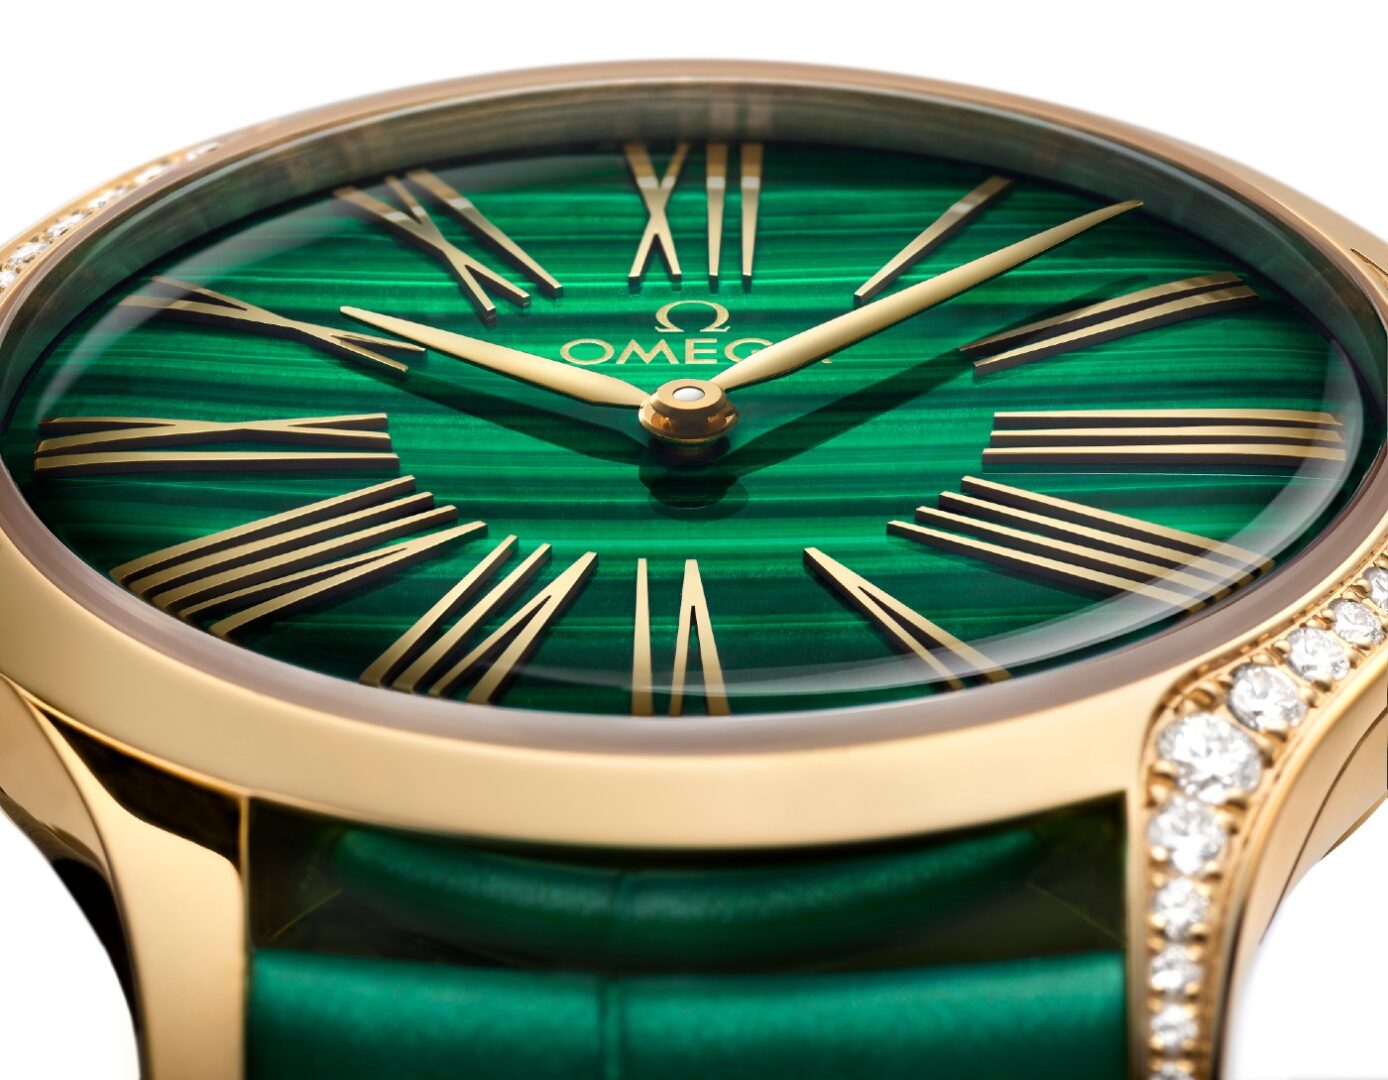 The OMEGA Trésor is Enlivened With a New Malachite Dial